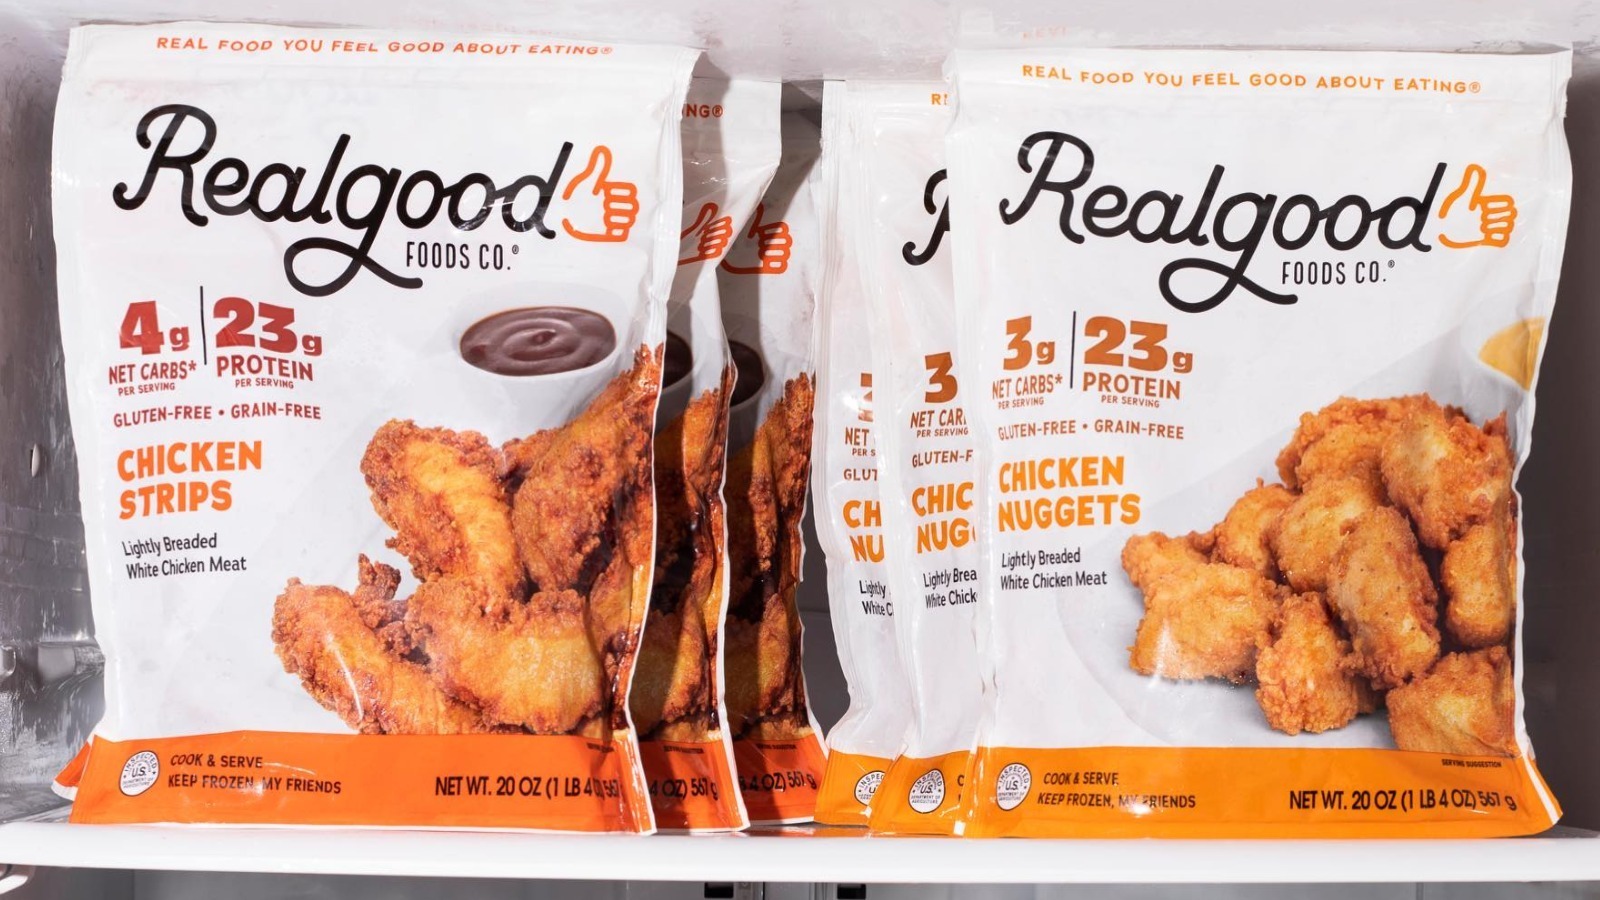 https://www.mashed.com/img/gallery/how-real-good-foods-wants-to-stand-out-with-its-new-breaded-chicken/l-intro-1660098754.jpg